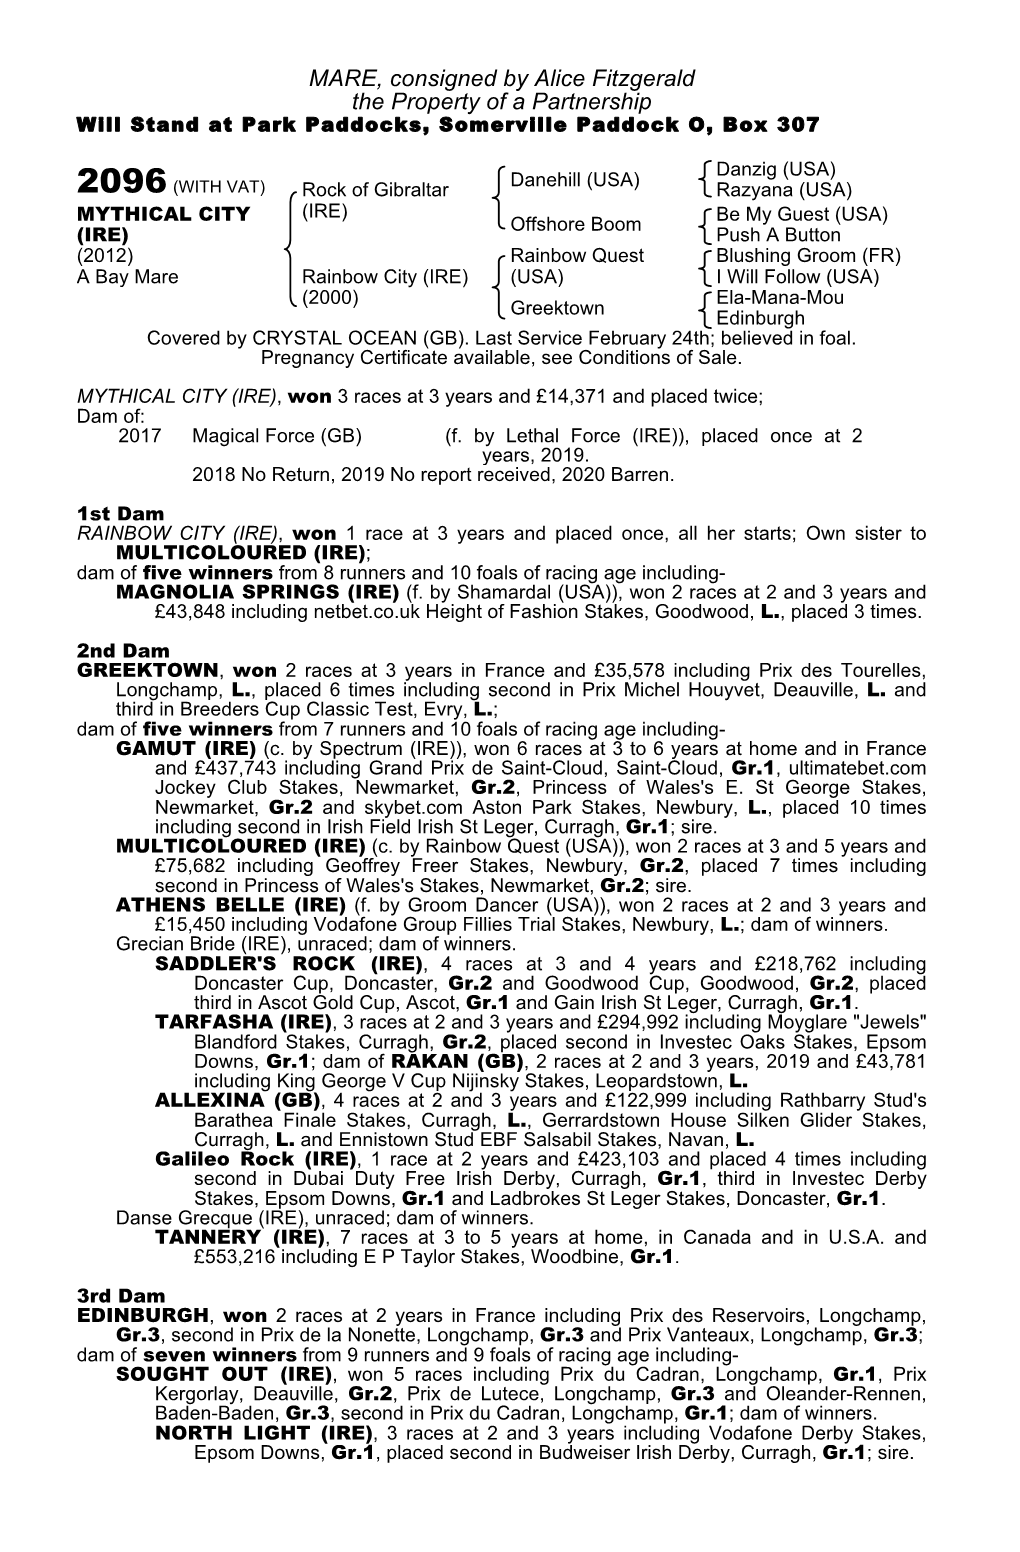 MARE, Consigned by Alice Fitzgerald the Property of a Partnership Will Stand at Park Paddocks, Somerville Paddock O, Box 307